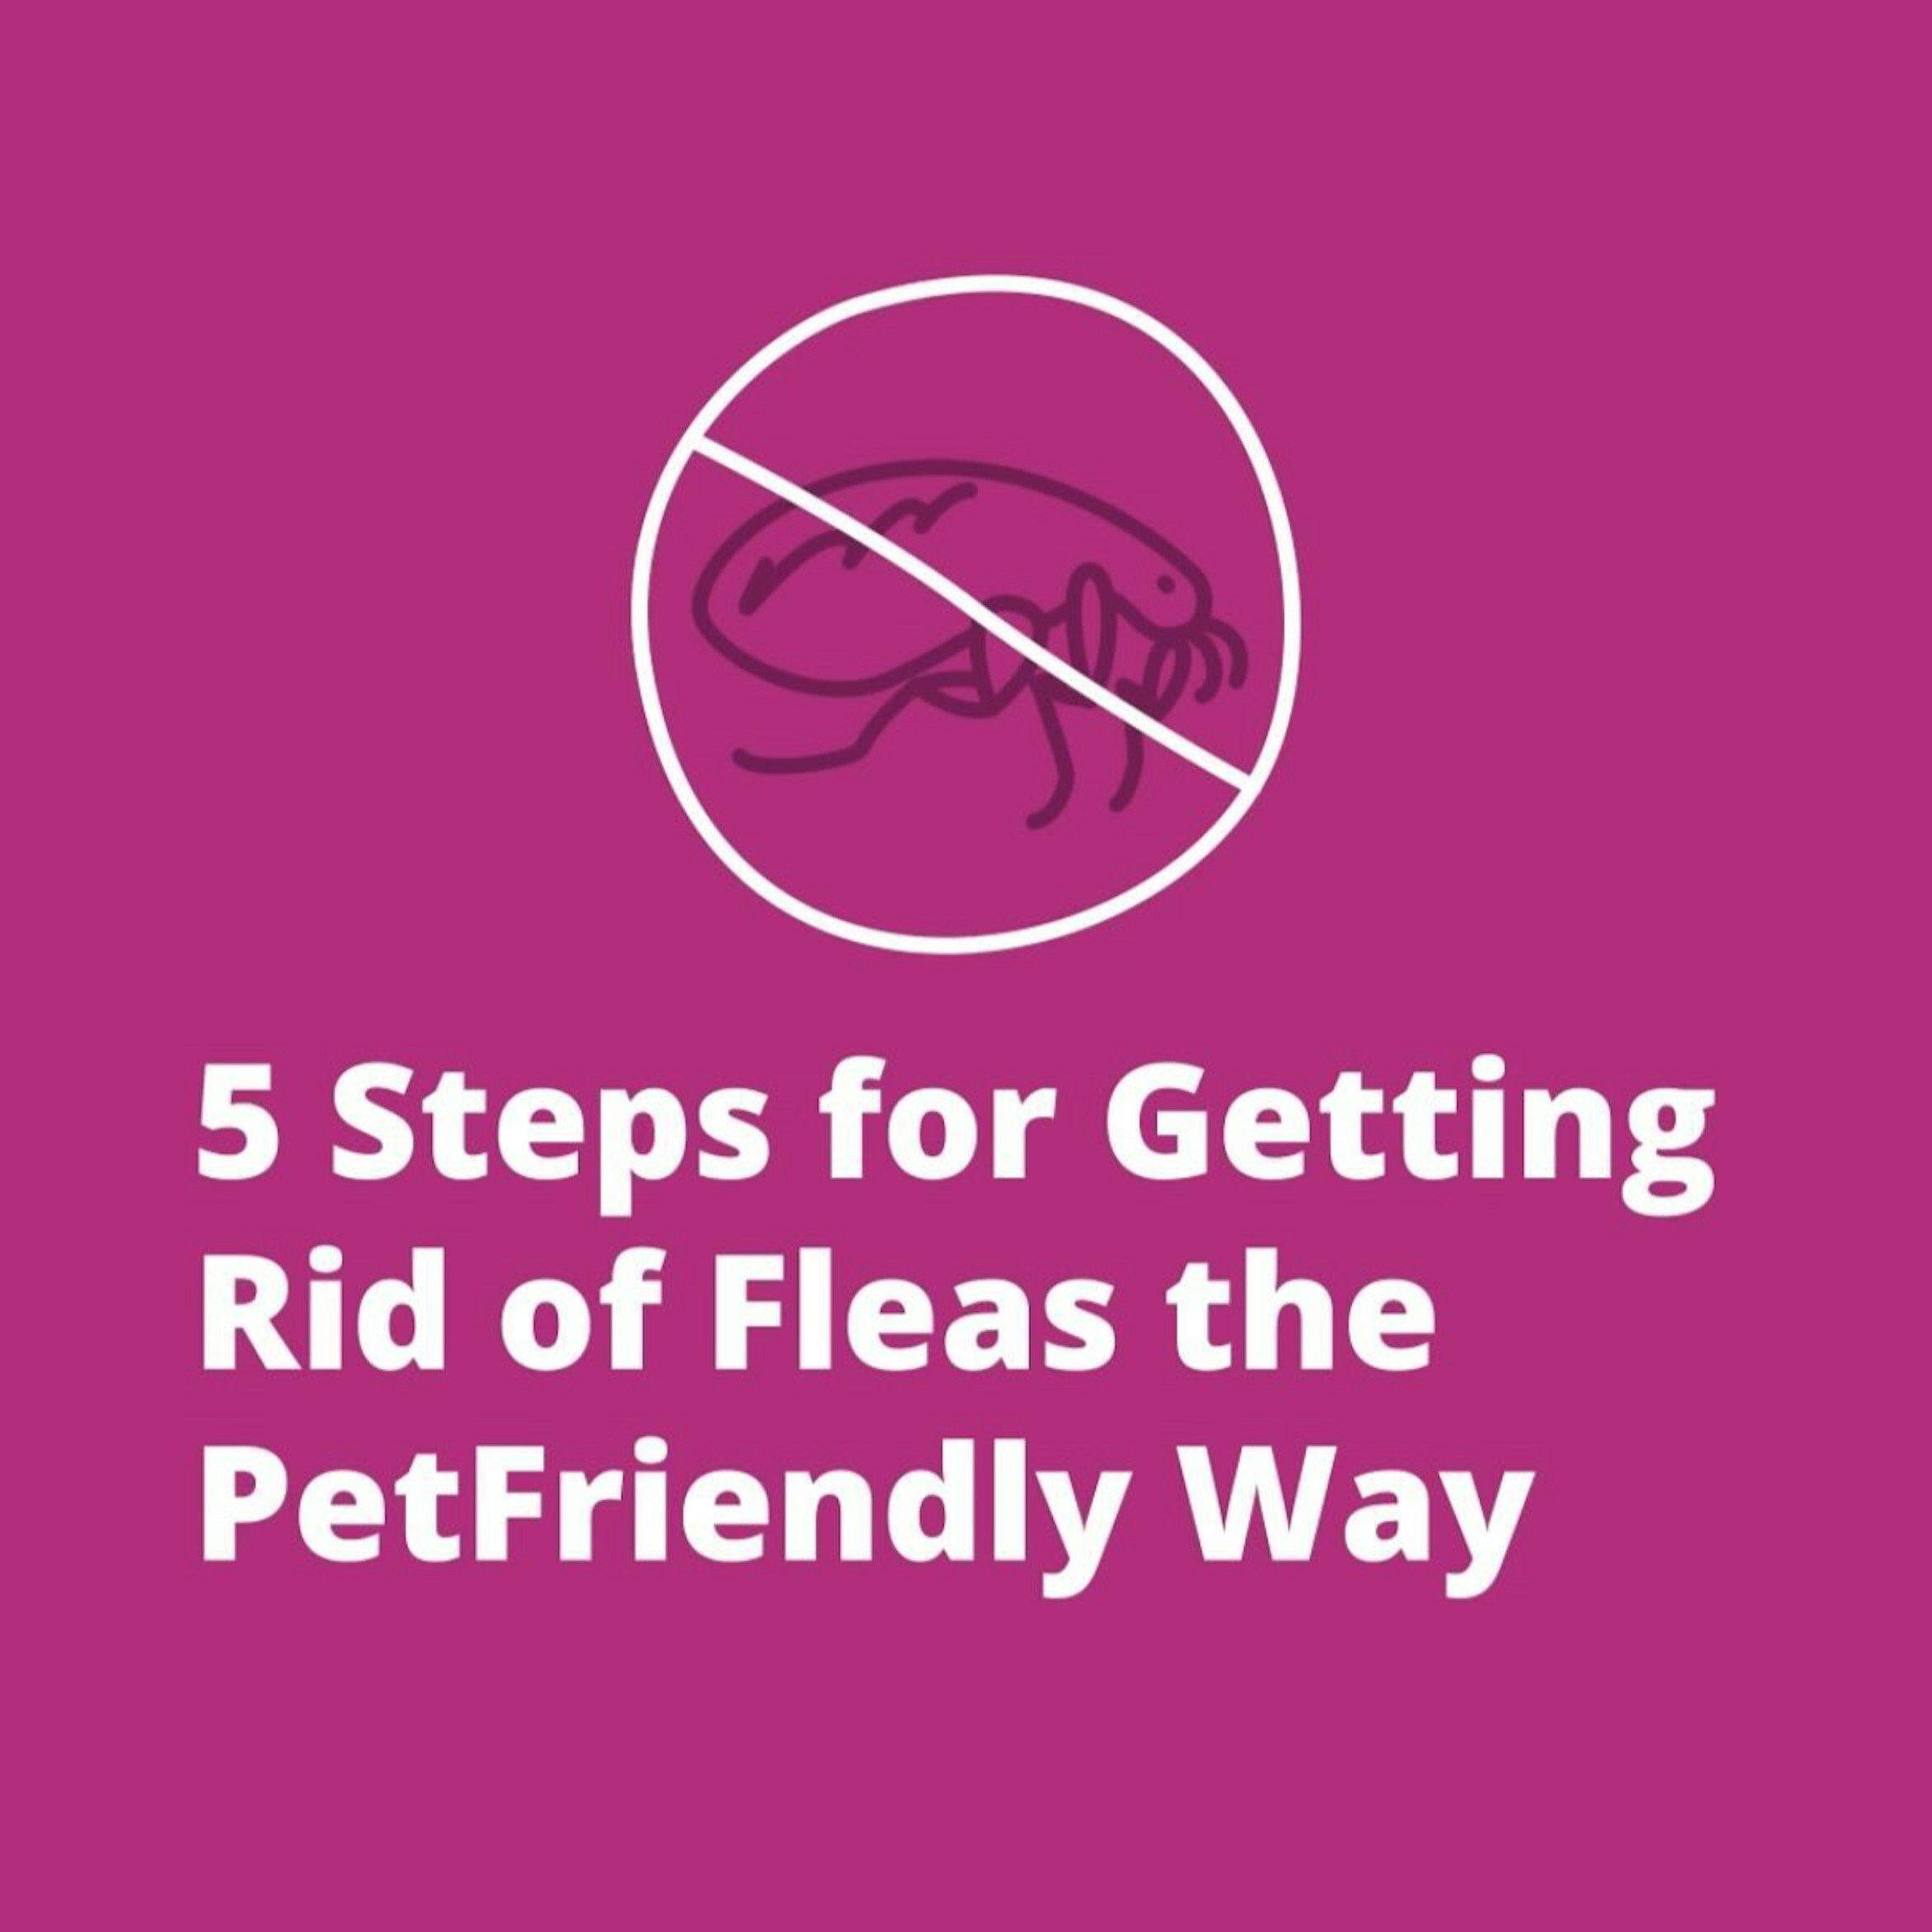 5 Steps to Get Rid of Fleas